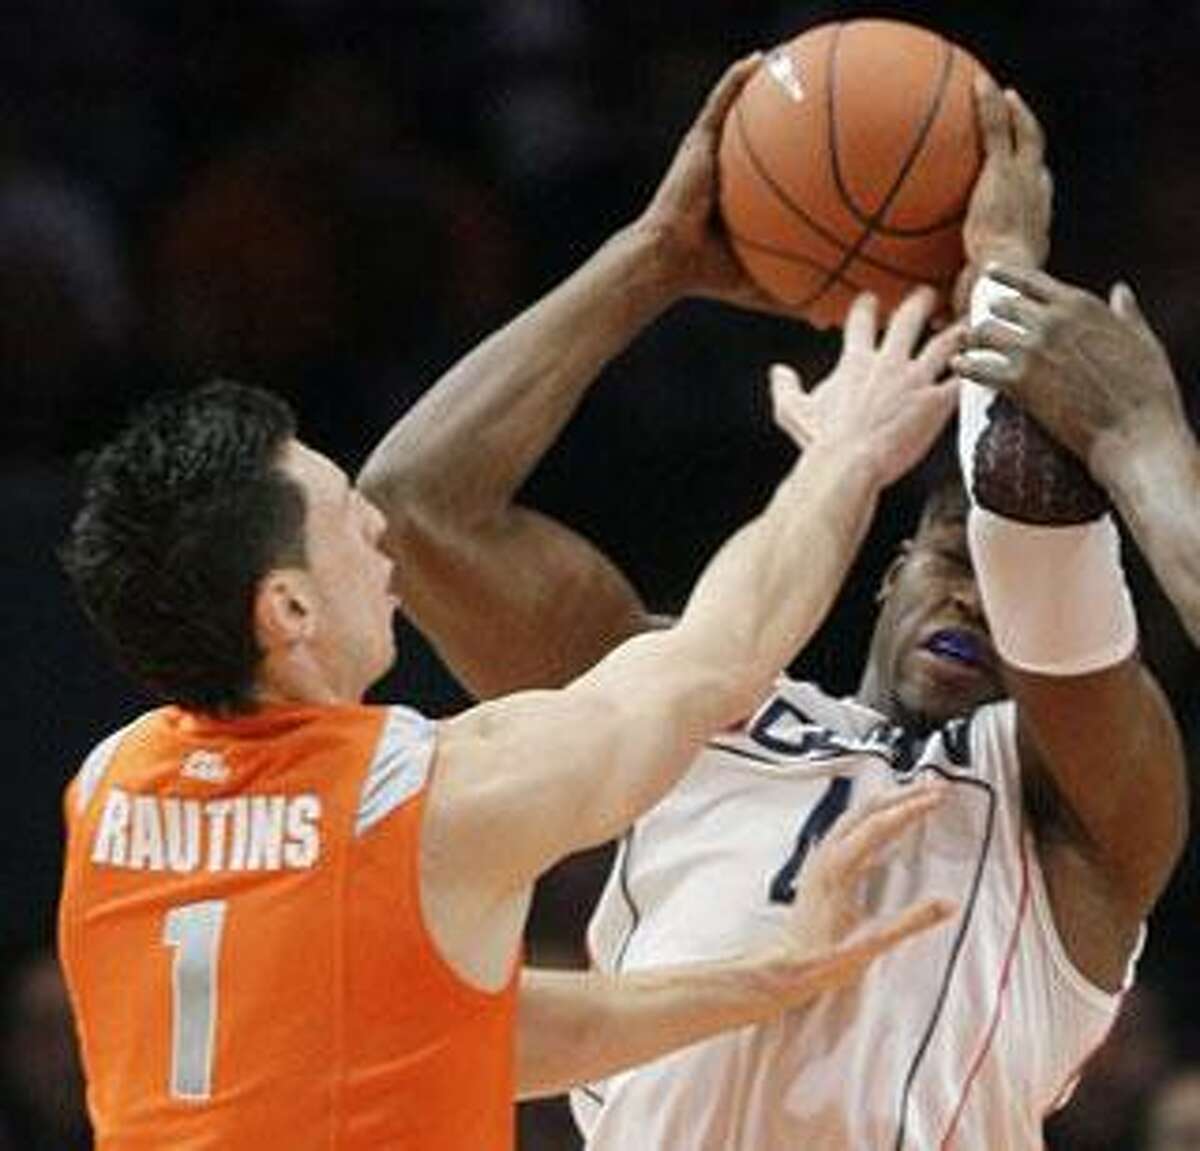 Syracuse's Andy Rautins, left, defends Connecticut's Jeff Adrien in the first half of an NCAA college basketball game in the quarterfinals of the Big East men's tournament Thursday, March 12, 2009, at Madison Square Garden in New York. (AP Photo/Julie Jacobson)